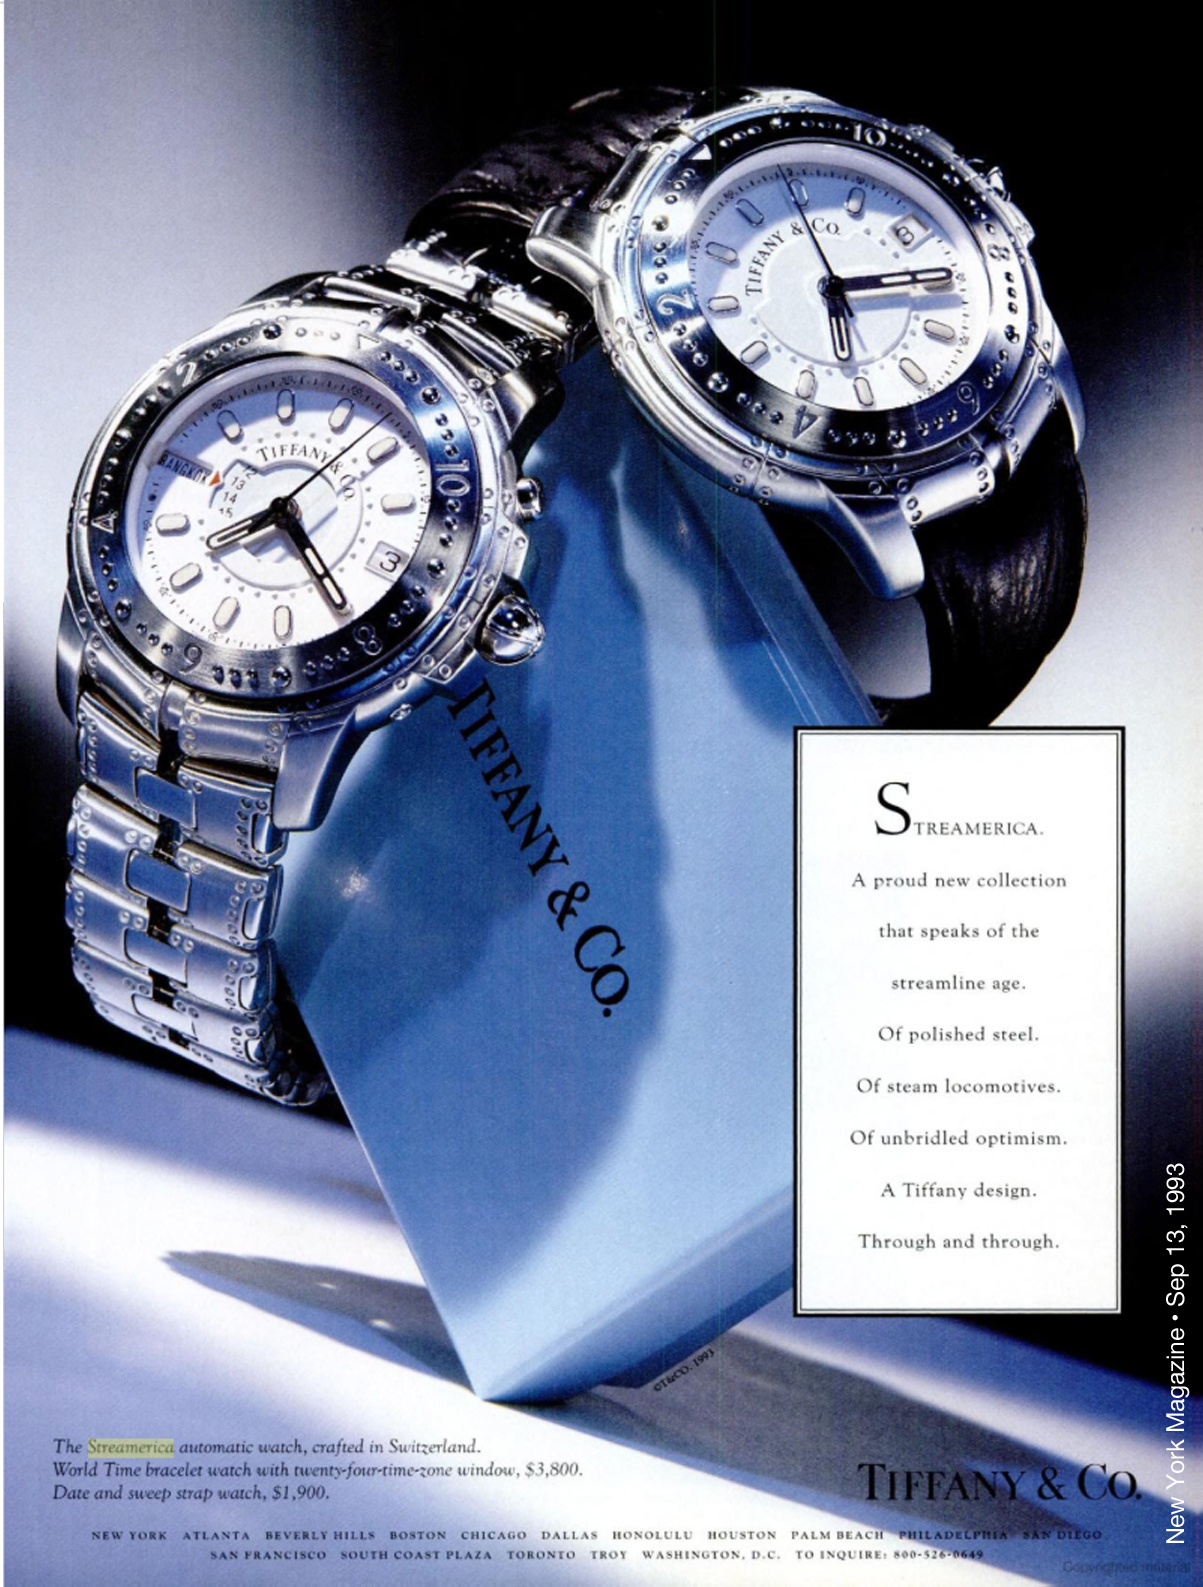 Tiffany & Co. Streamerica Stainless Steel Collection Advertisements Watch Ads New York Magazine September 13,1993 Prices Price Worth